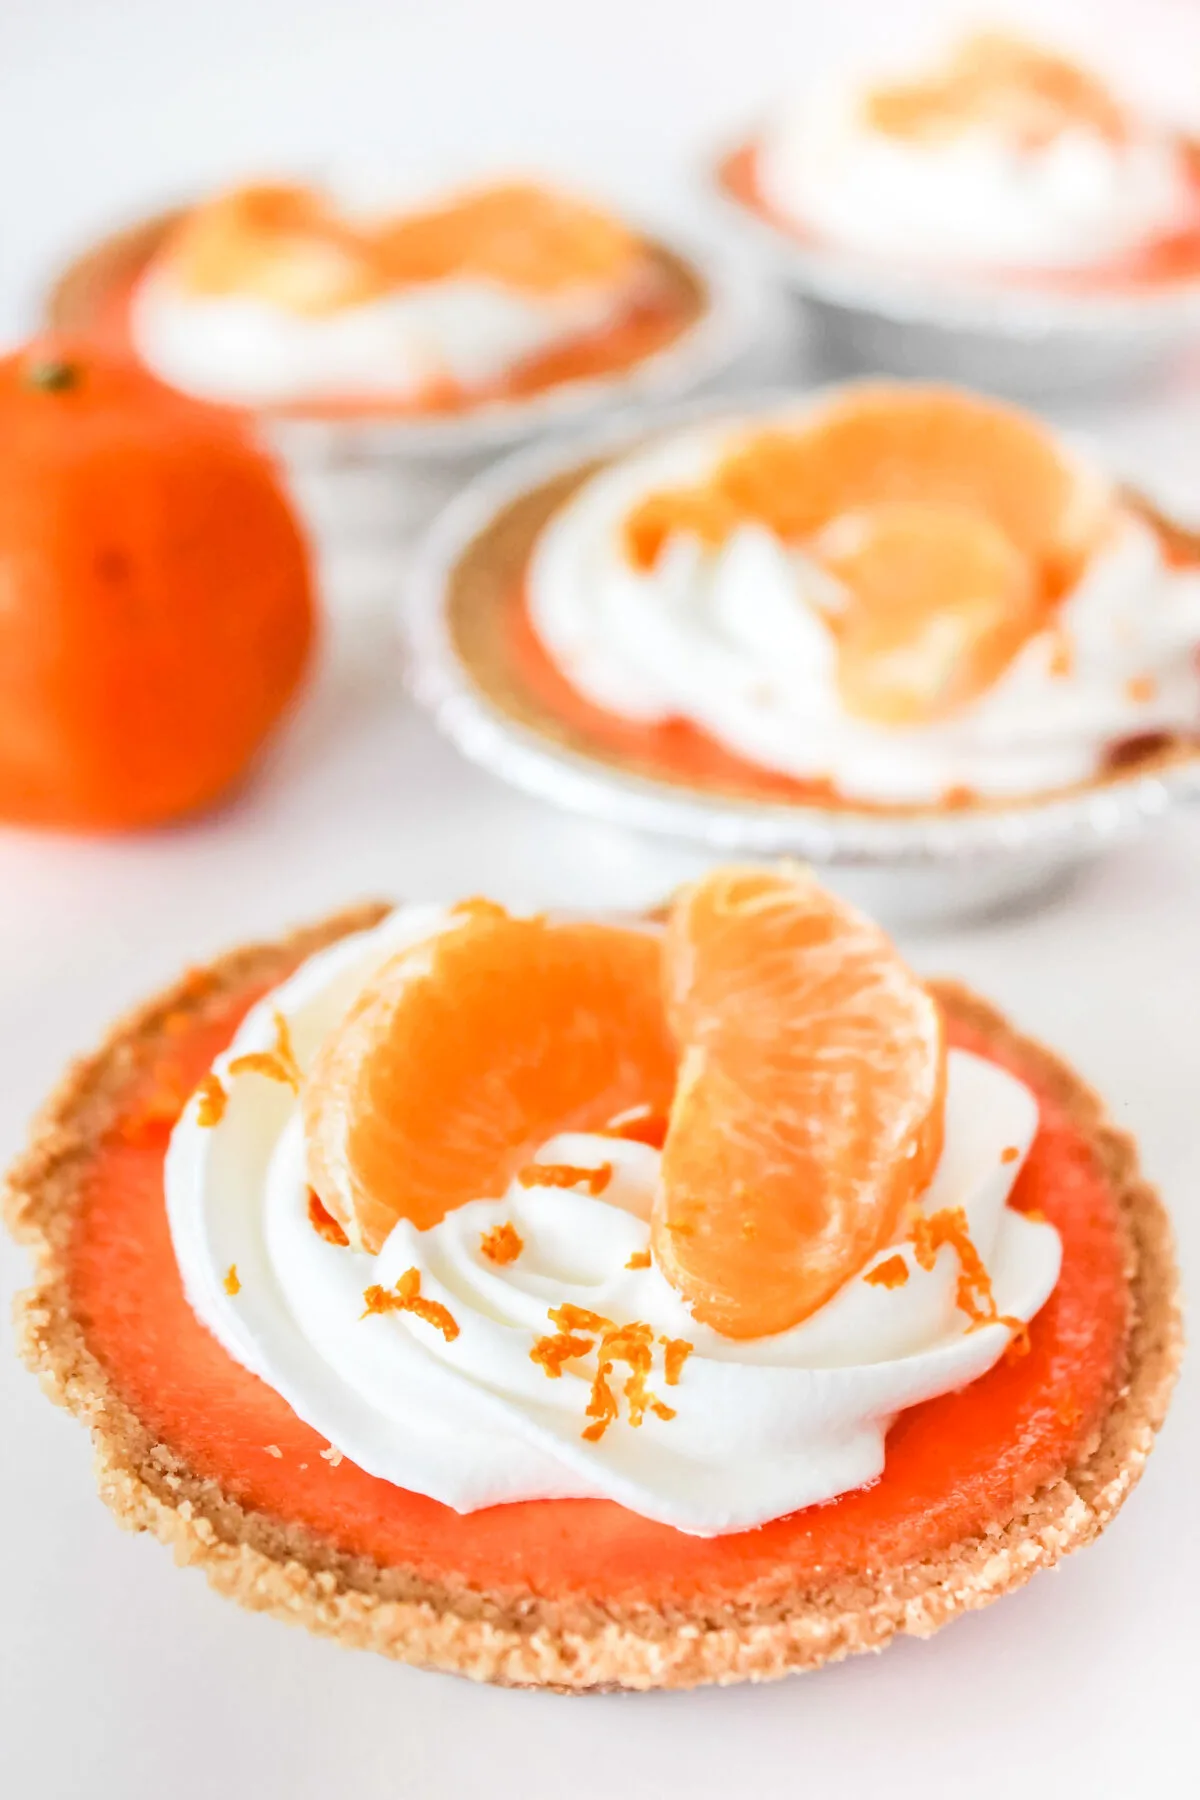 These clementine cream tarts are so easy to make, and the sweet-yet-tangy taste of clementines will have you licking your fingers for more!